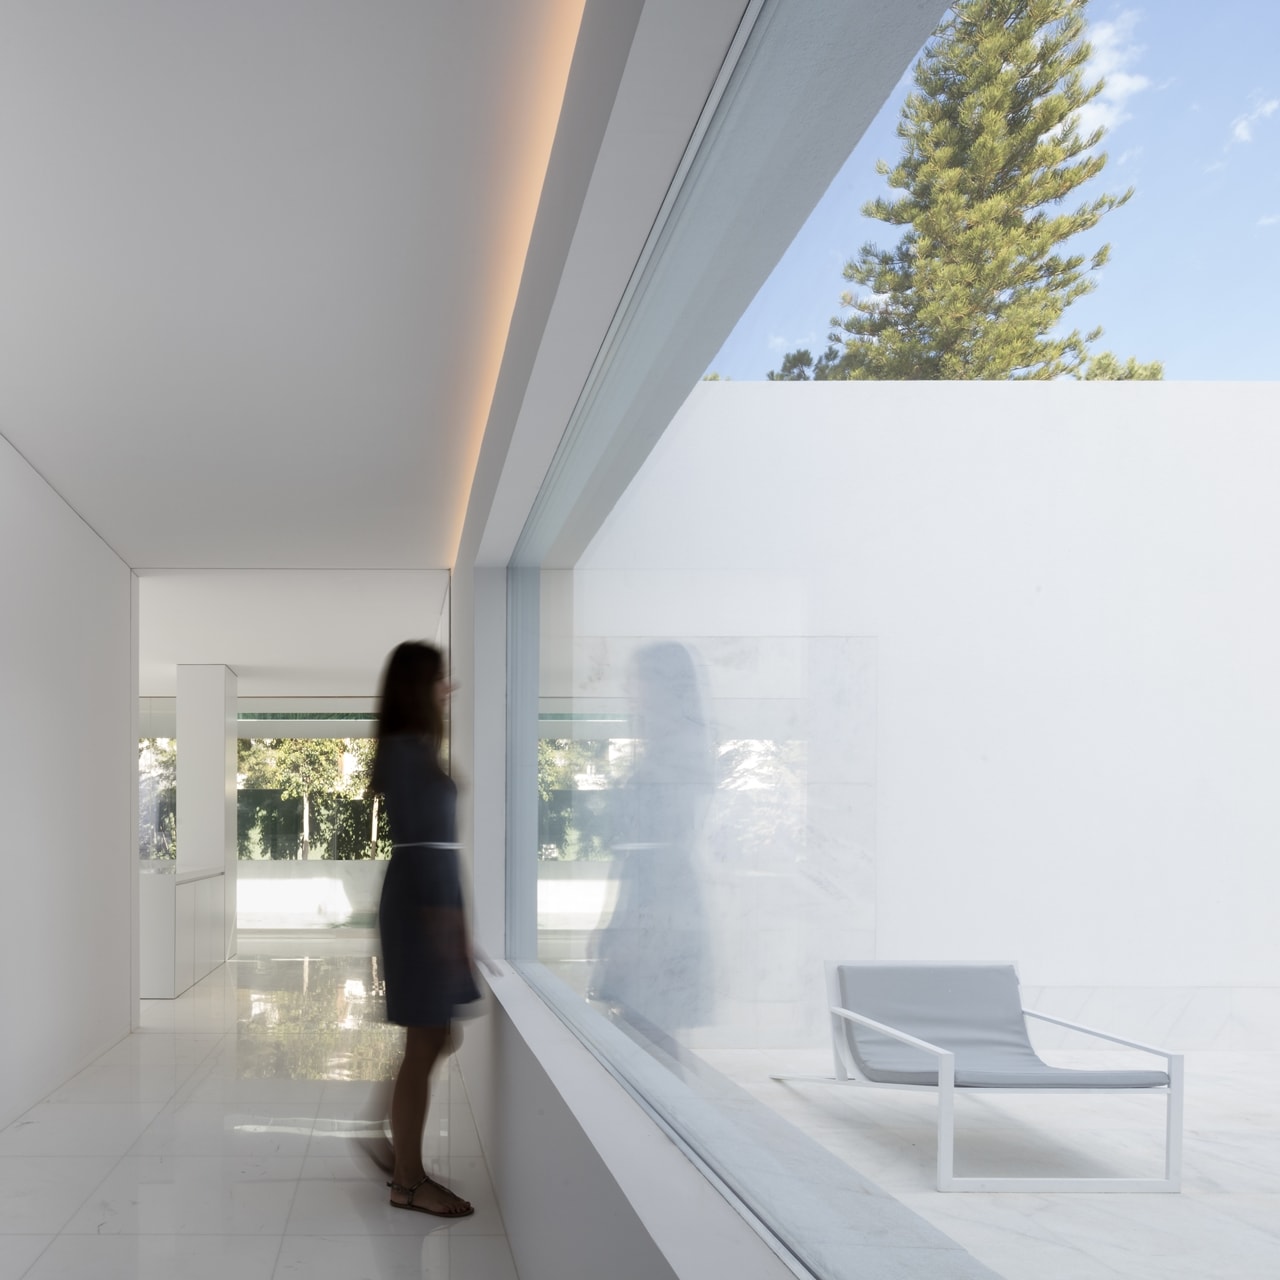 Clean minimalist glass facade in minimalist house designed by Fran Silvestre Architects